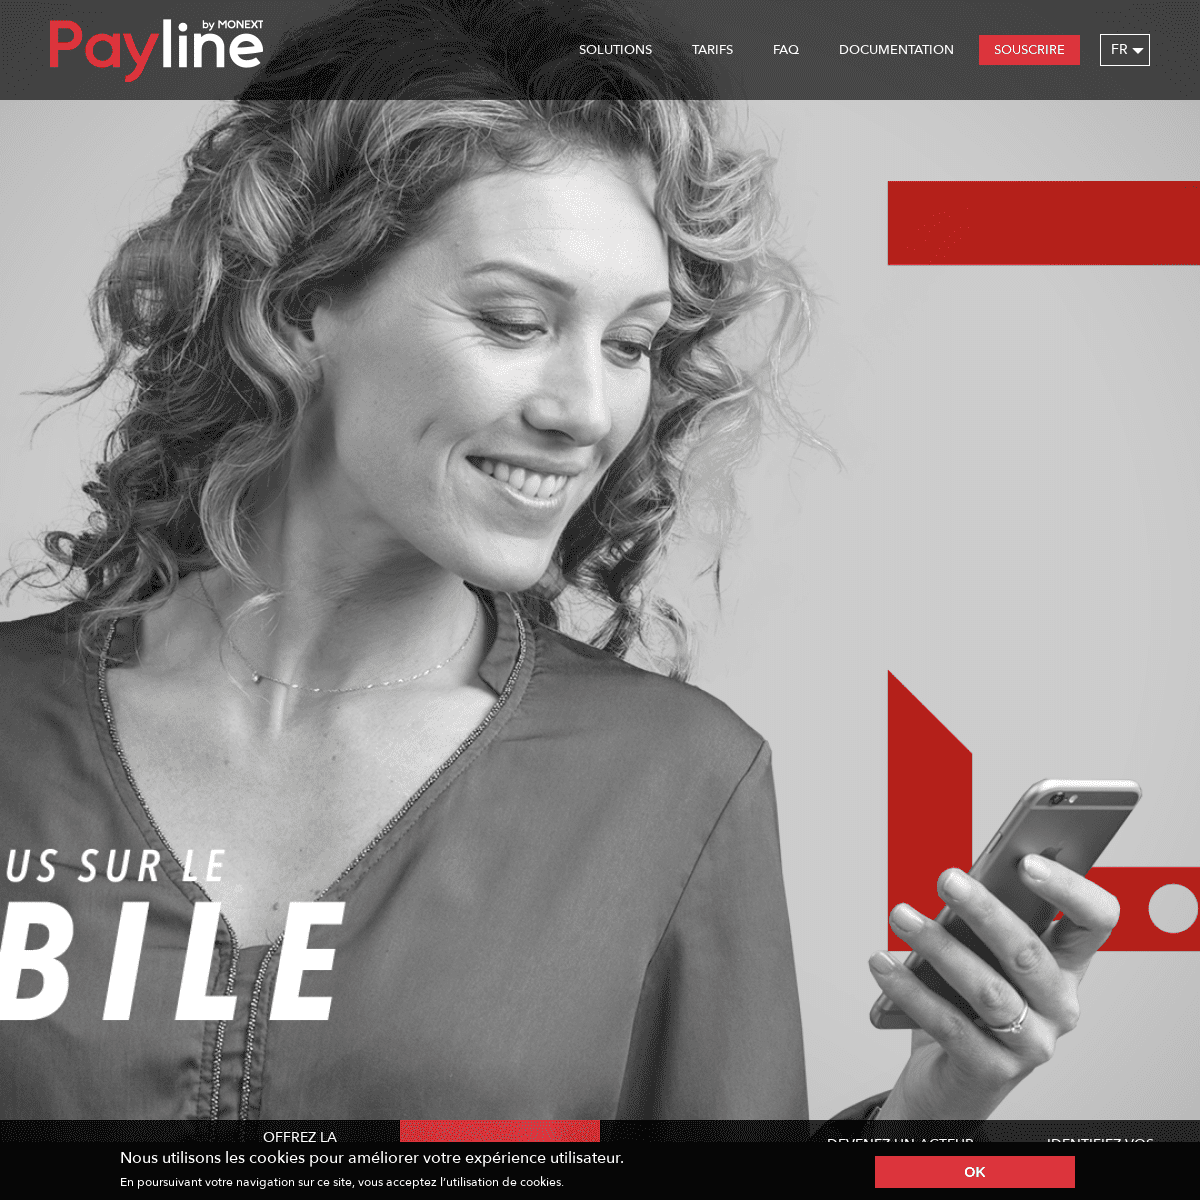 A complete backup of payline.com